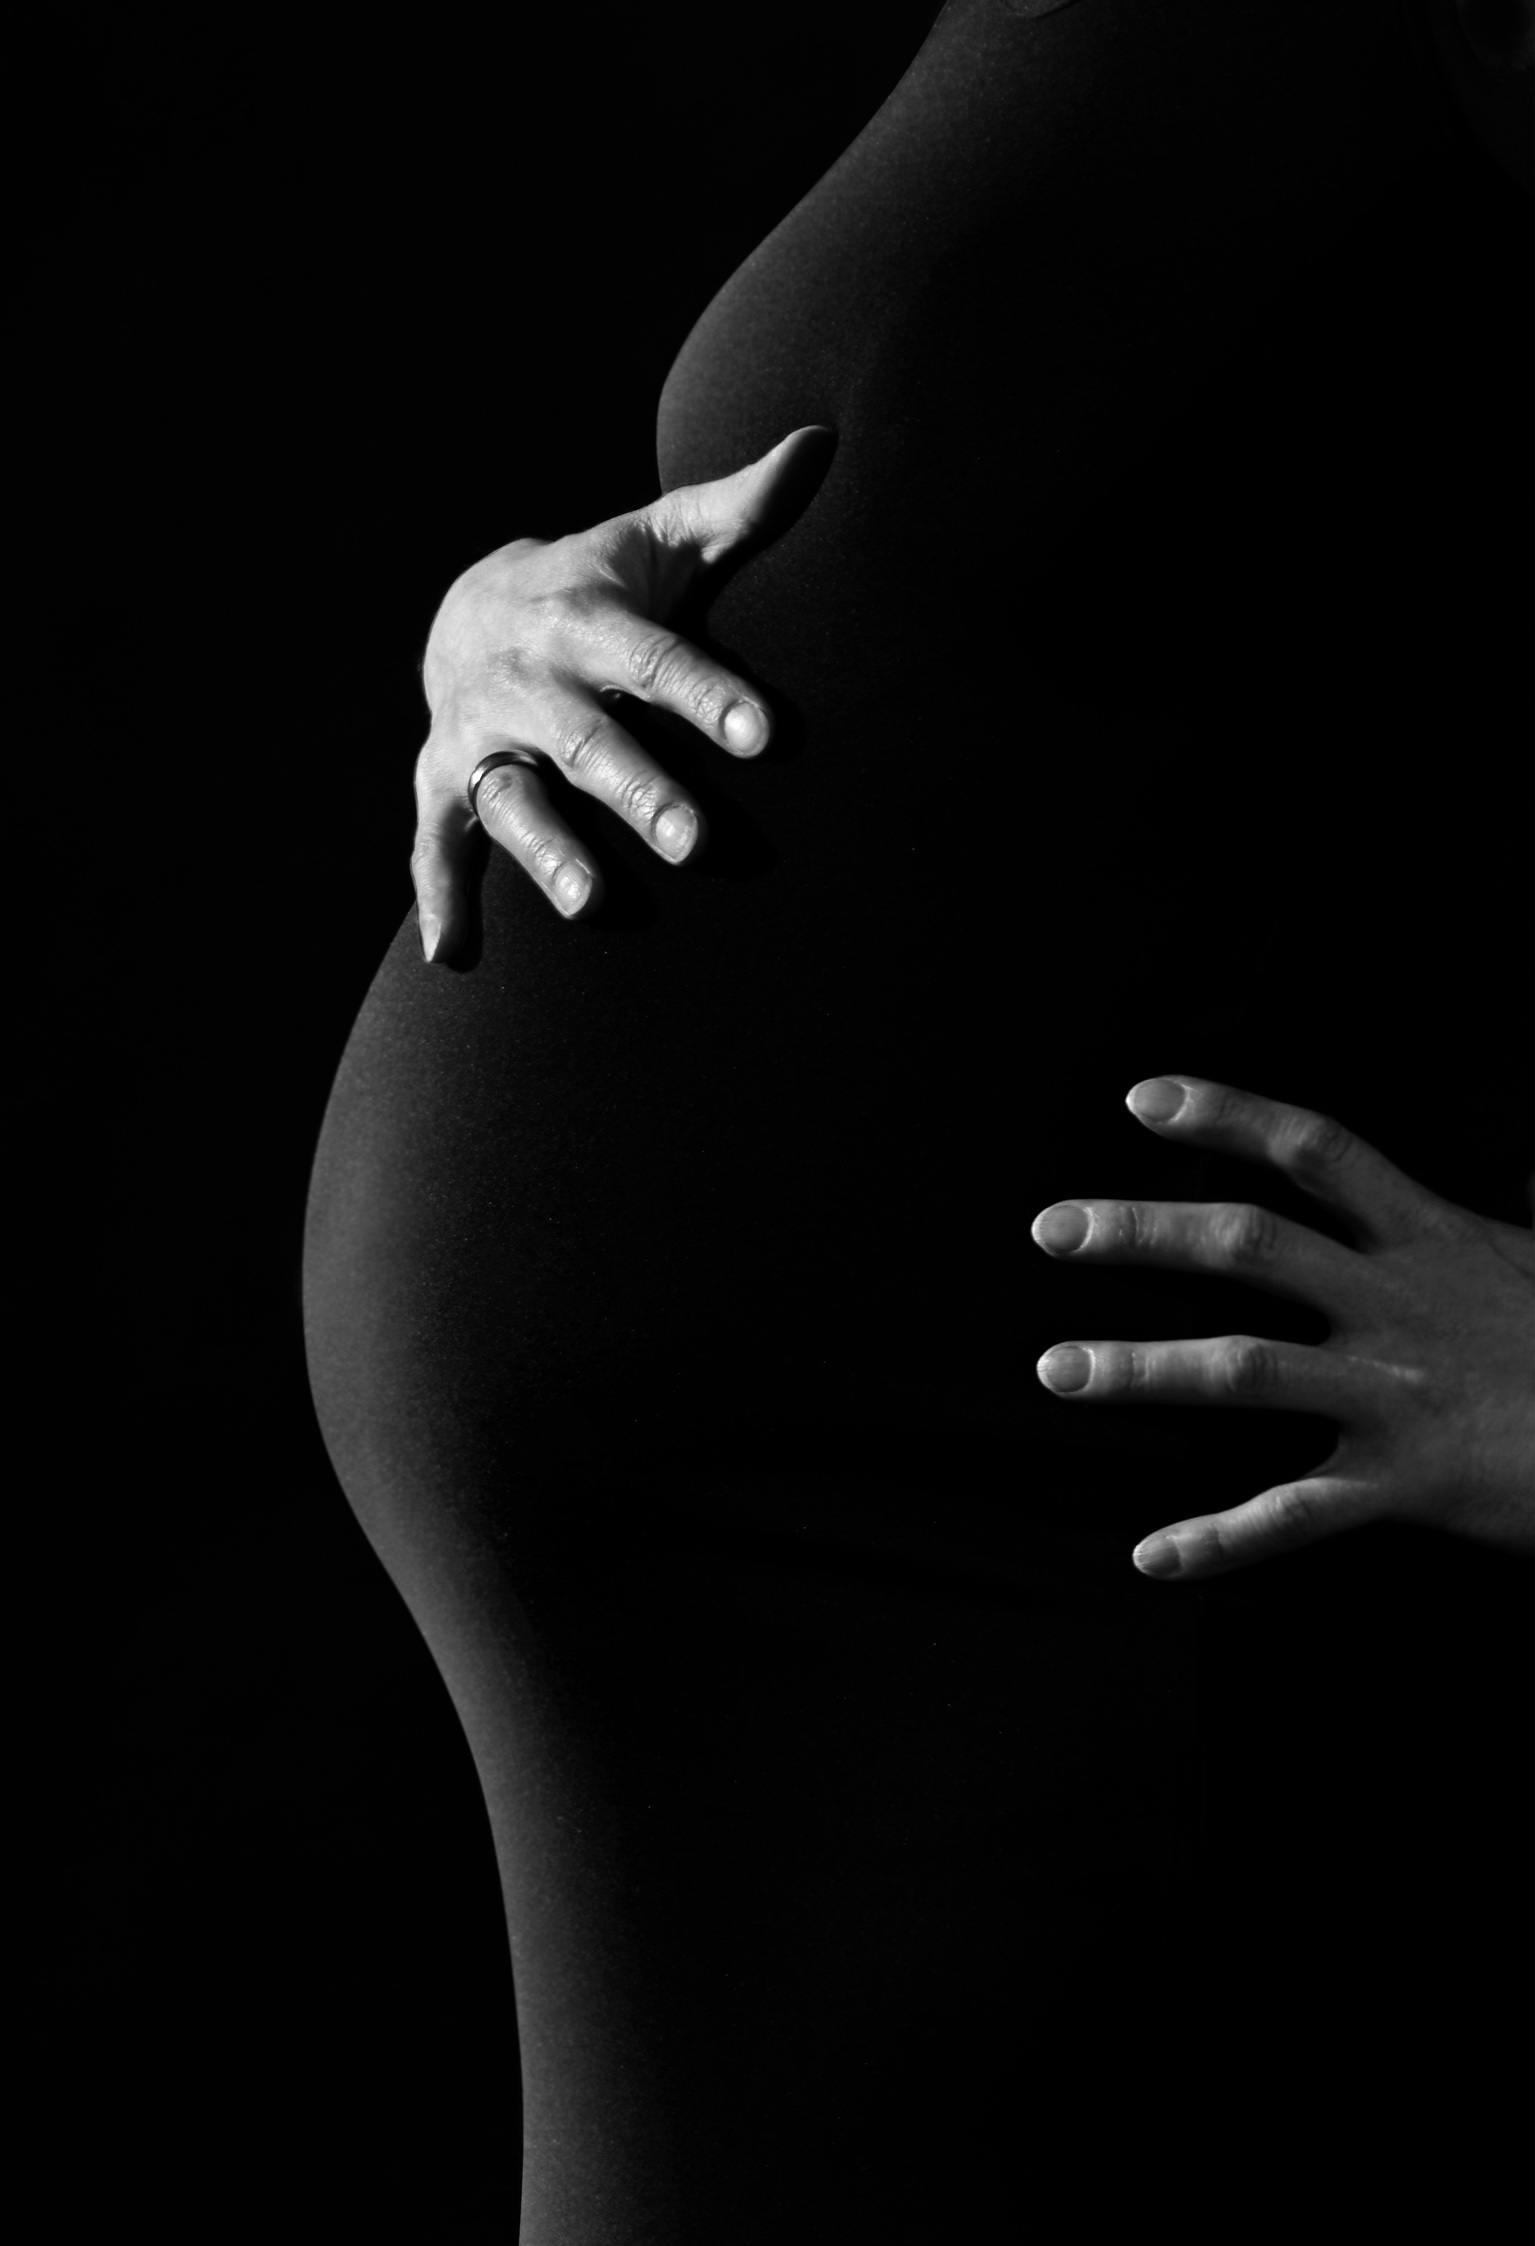 A pregnant woman's belly | Source: Pexels